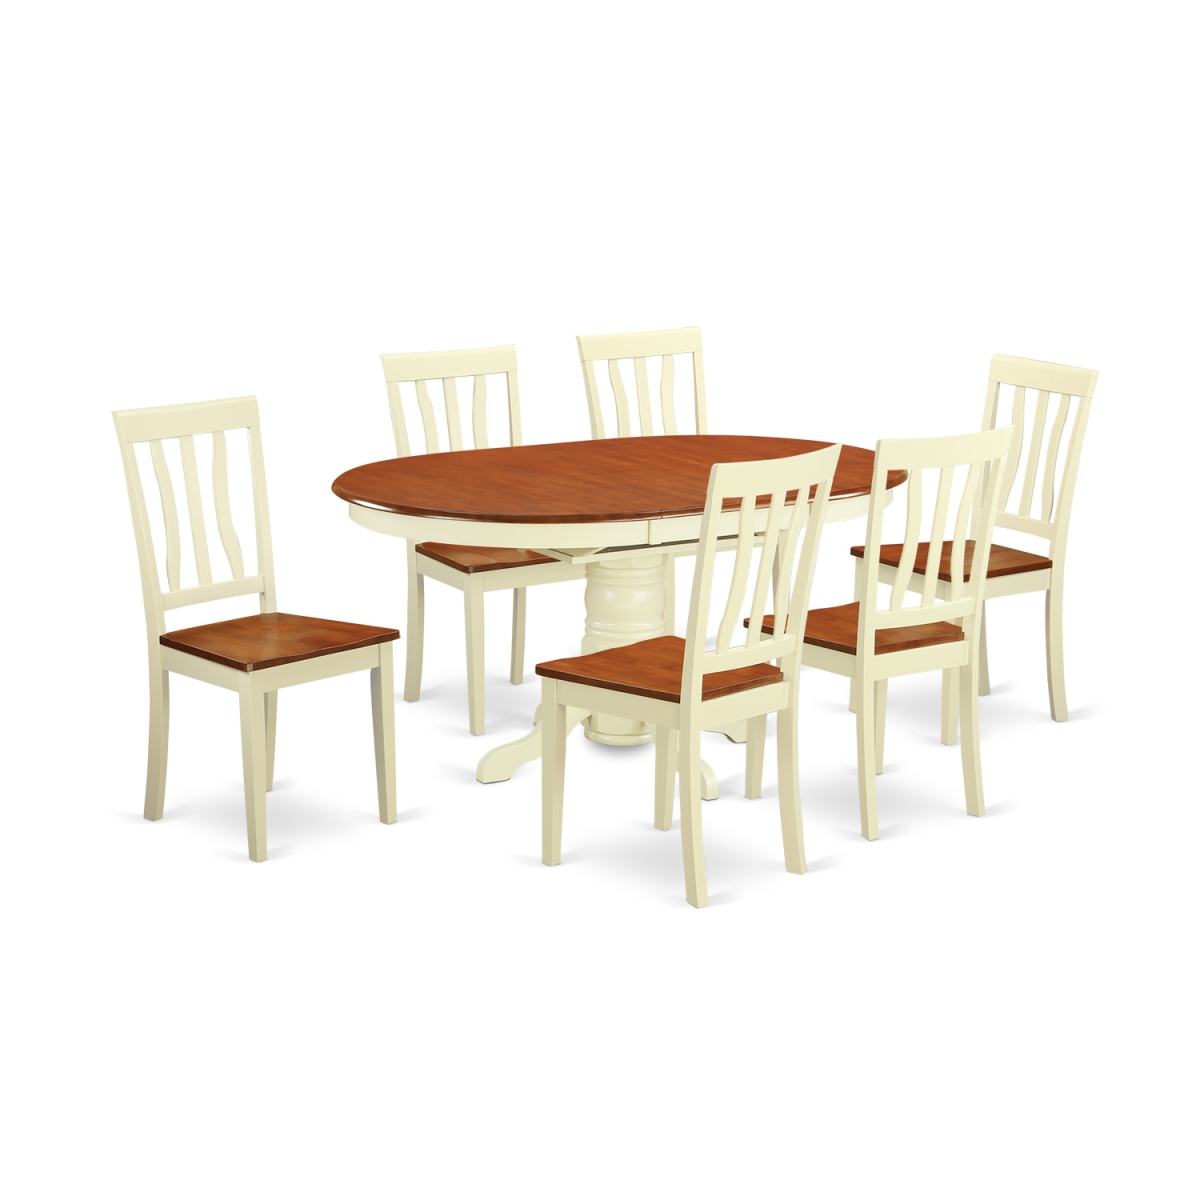 Picture of East West Furniture AVAT7-WHI-W Dining Set - Table & 6 Chairs, Buttermilk & Cherry - 7 Piece